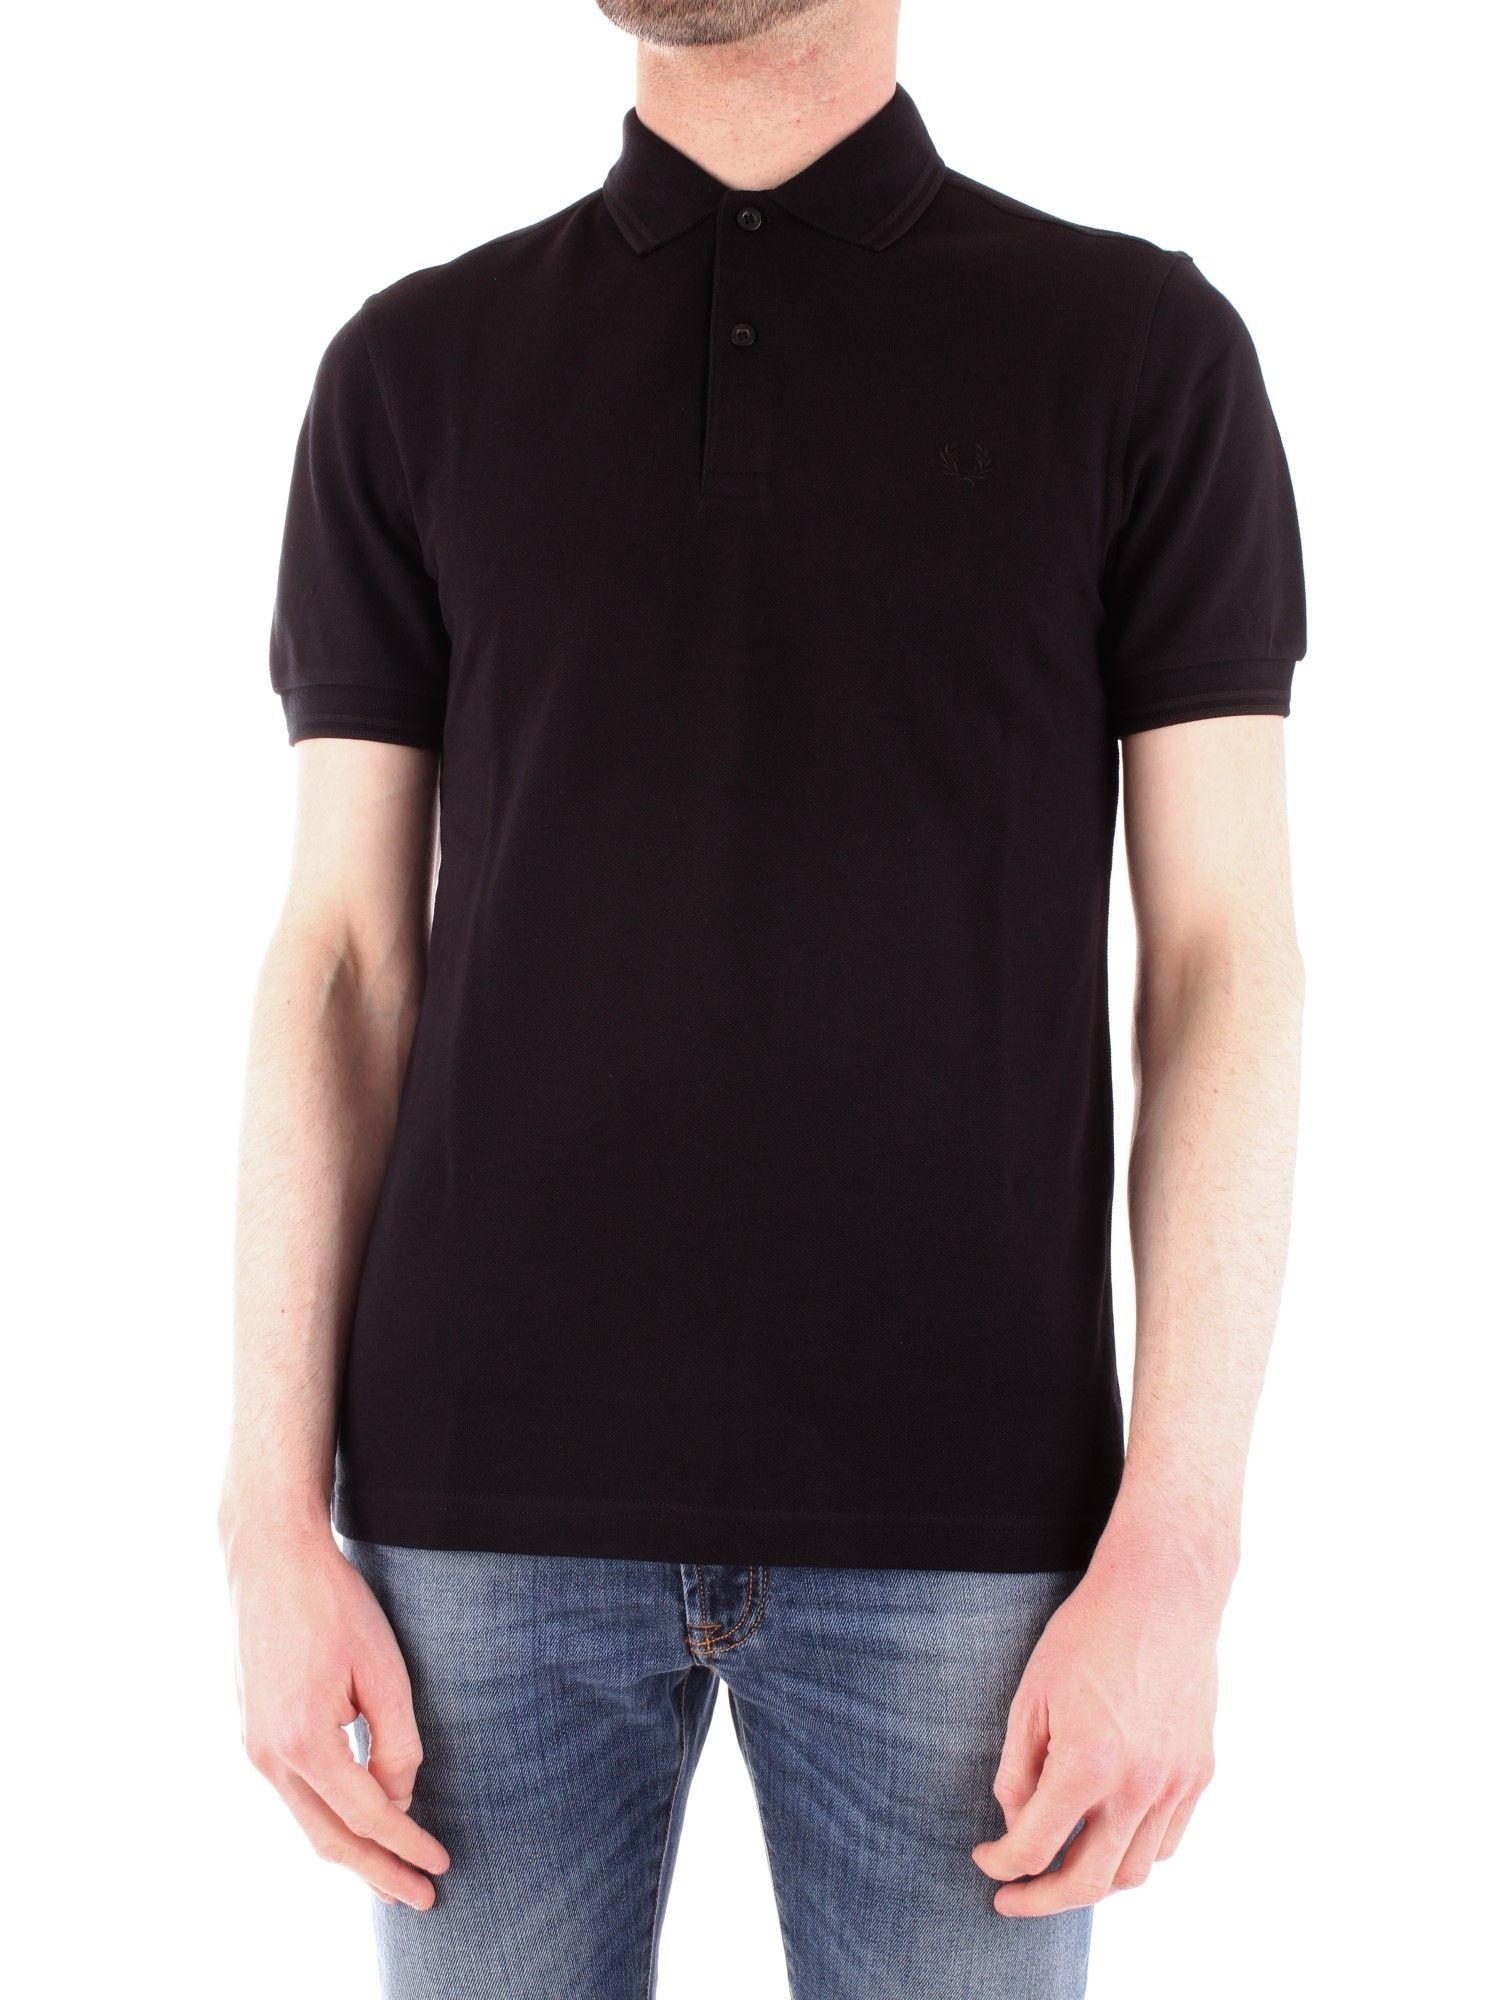 Fred Perry Black Cotton Polo Shirt in Black for Men - Lyst